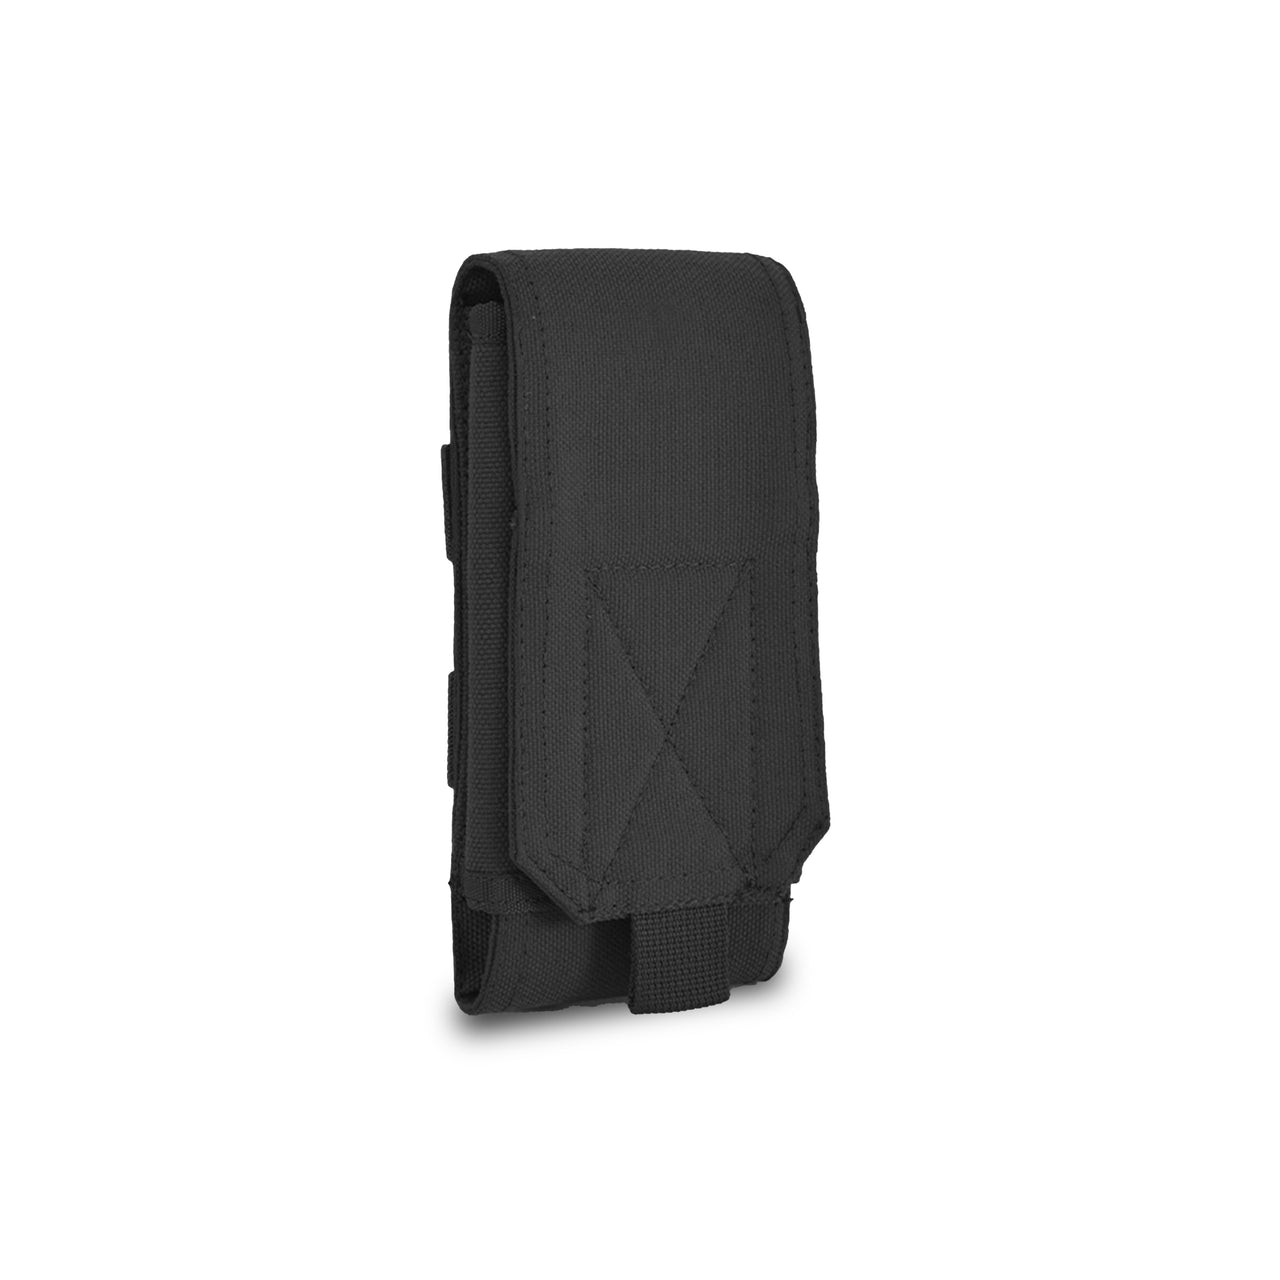 Tactical Smartphone Pouch - Black